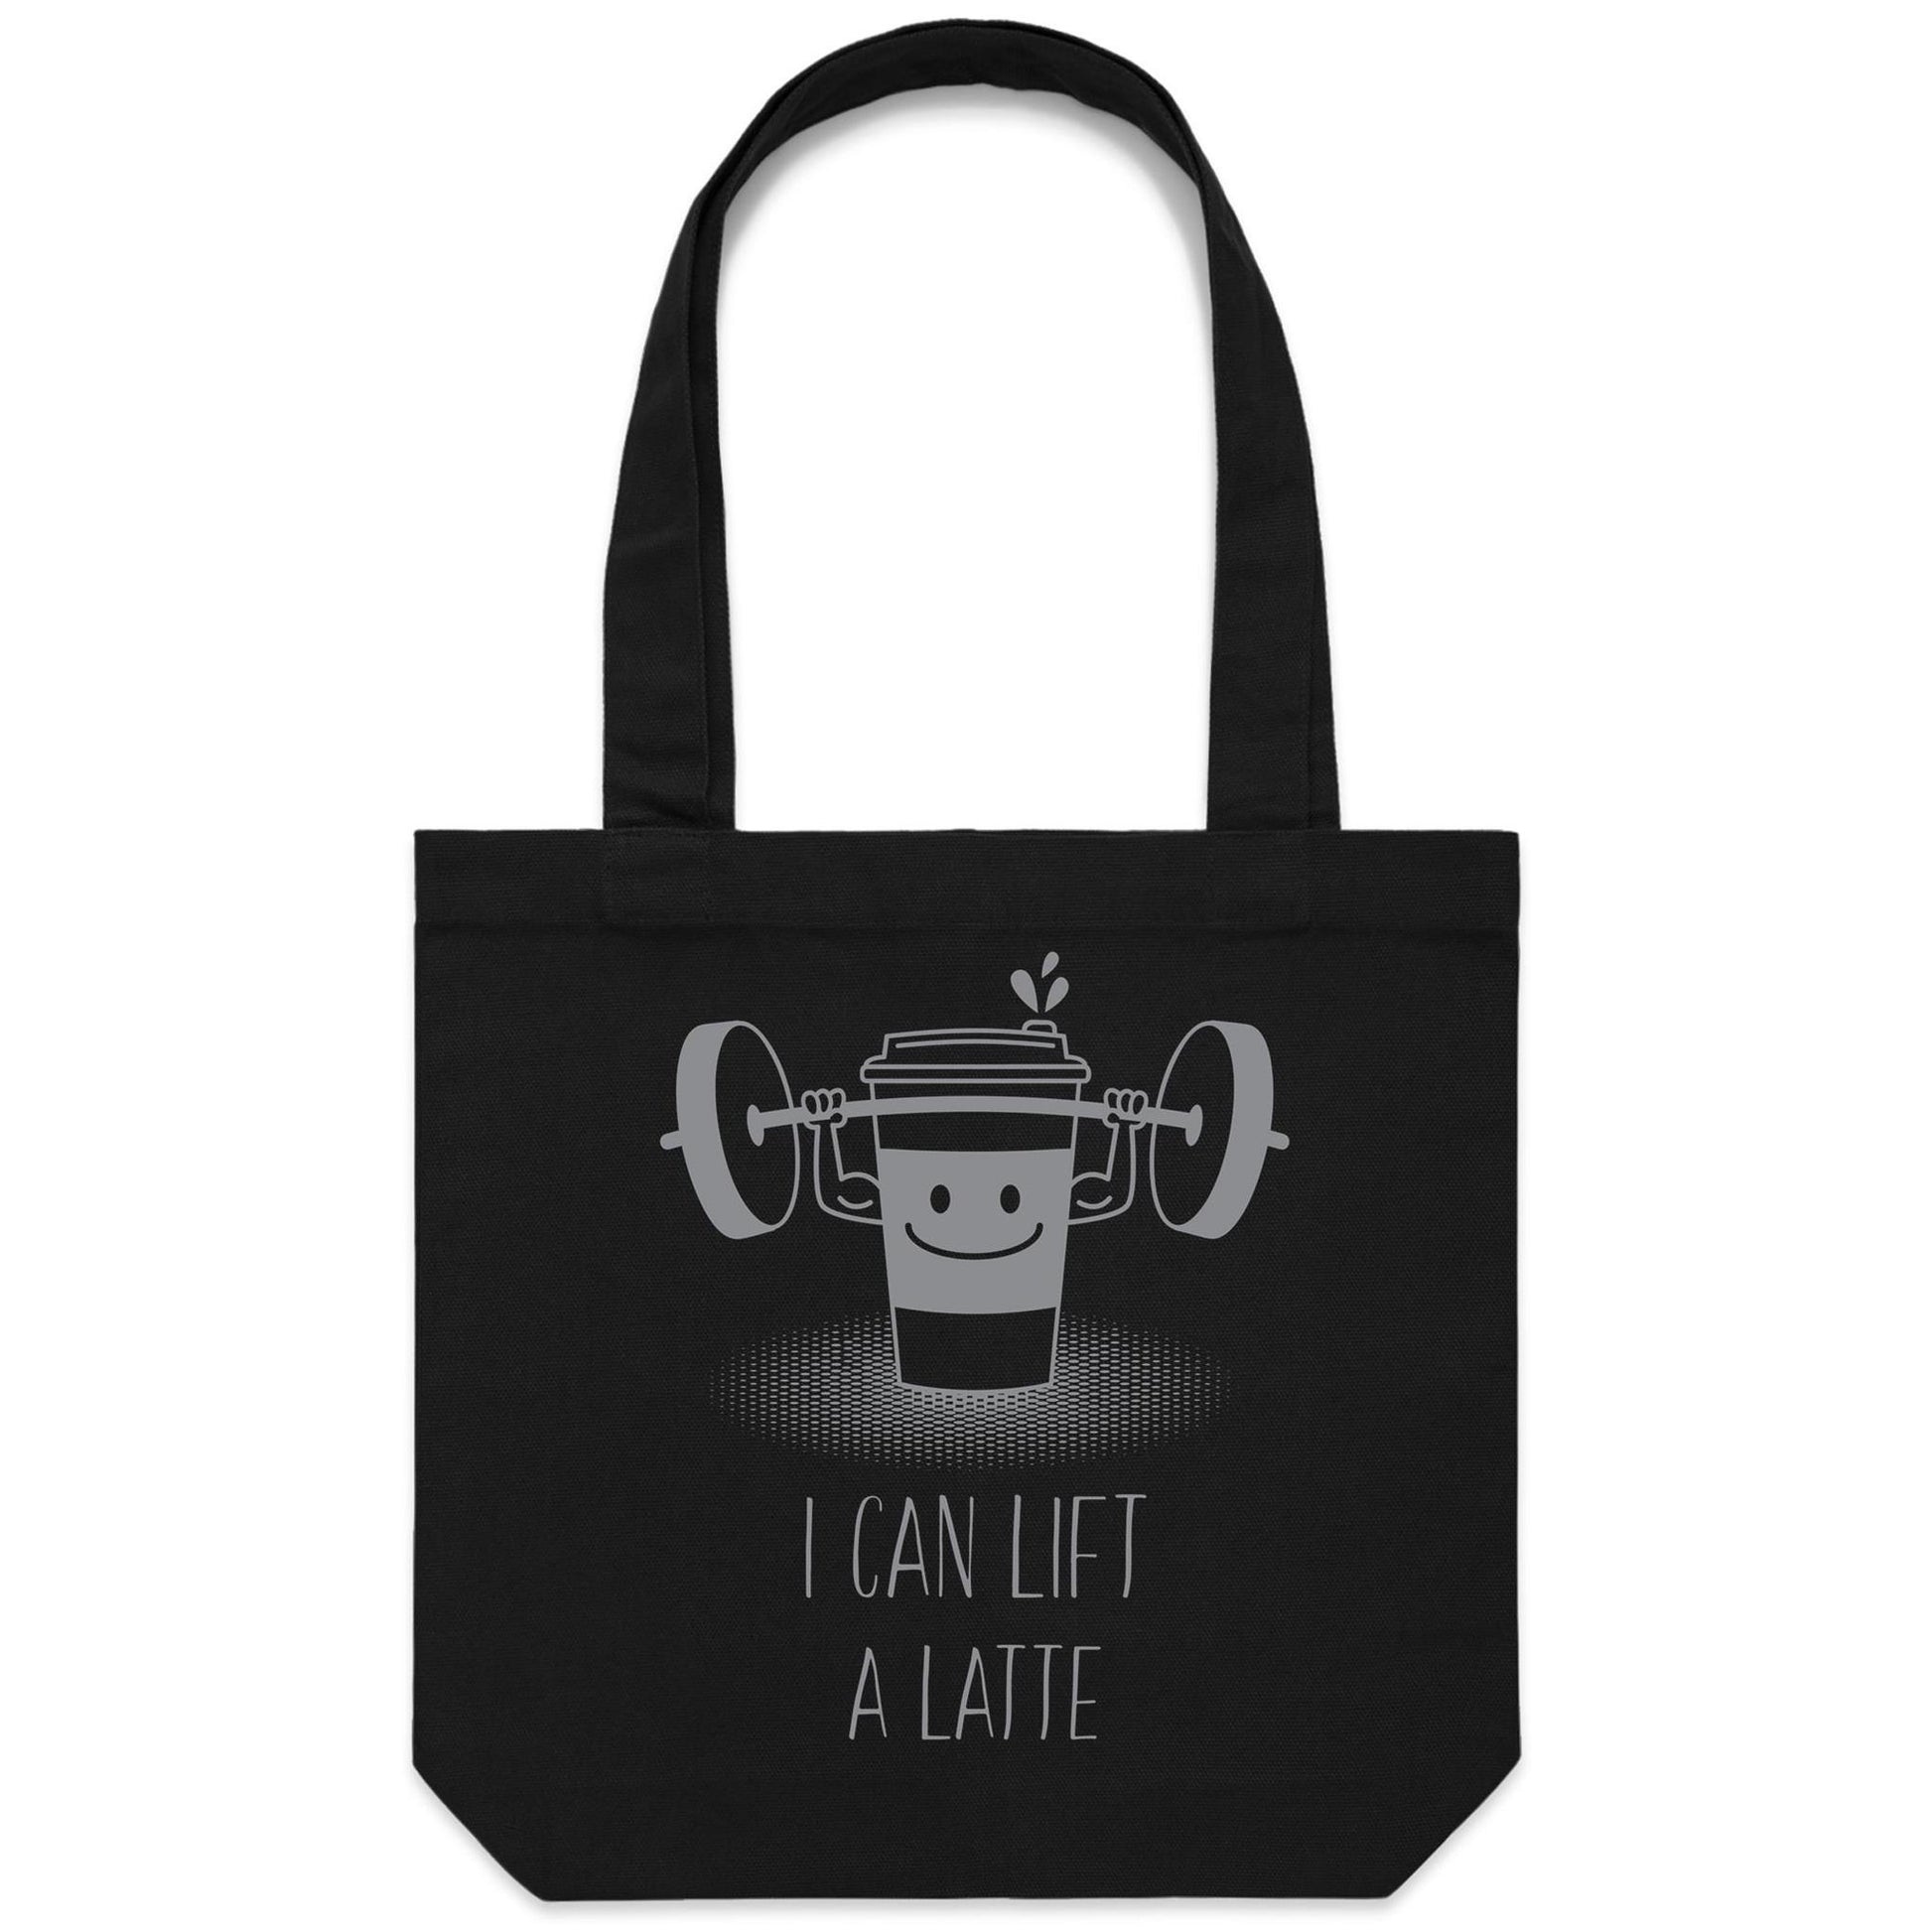 I Can Lift A Latte - Canvas Tote Bag Black One-Size Tote Bag Coffee